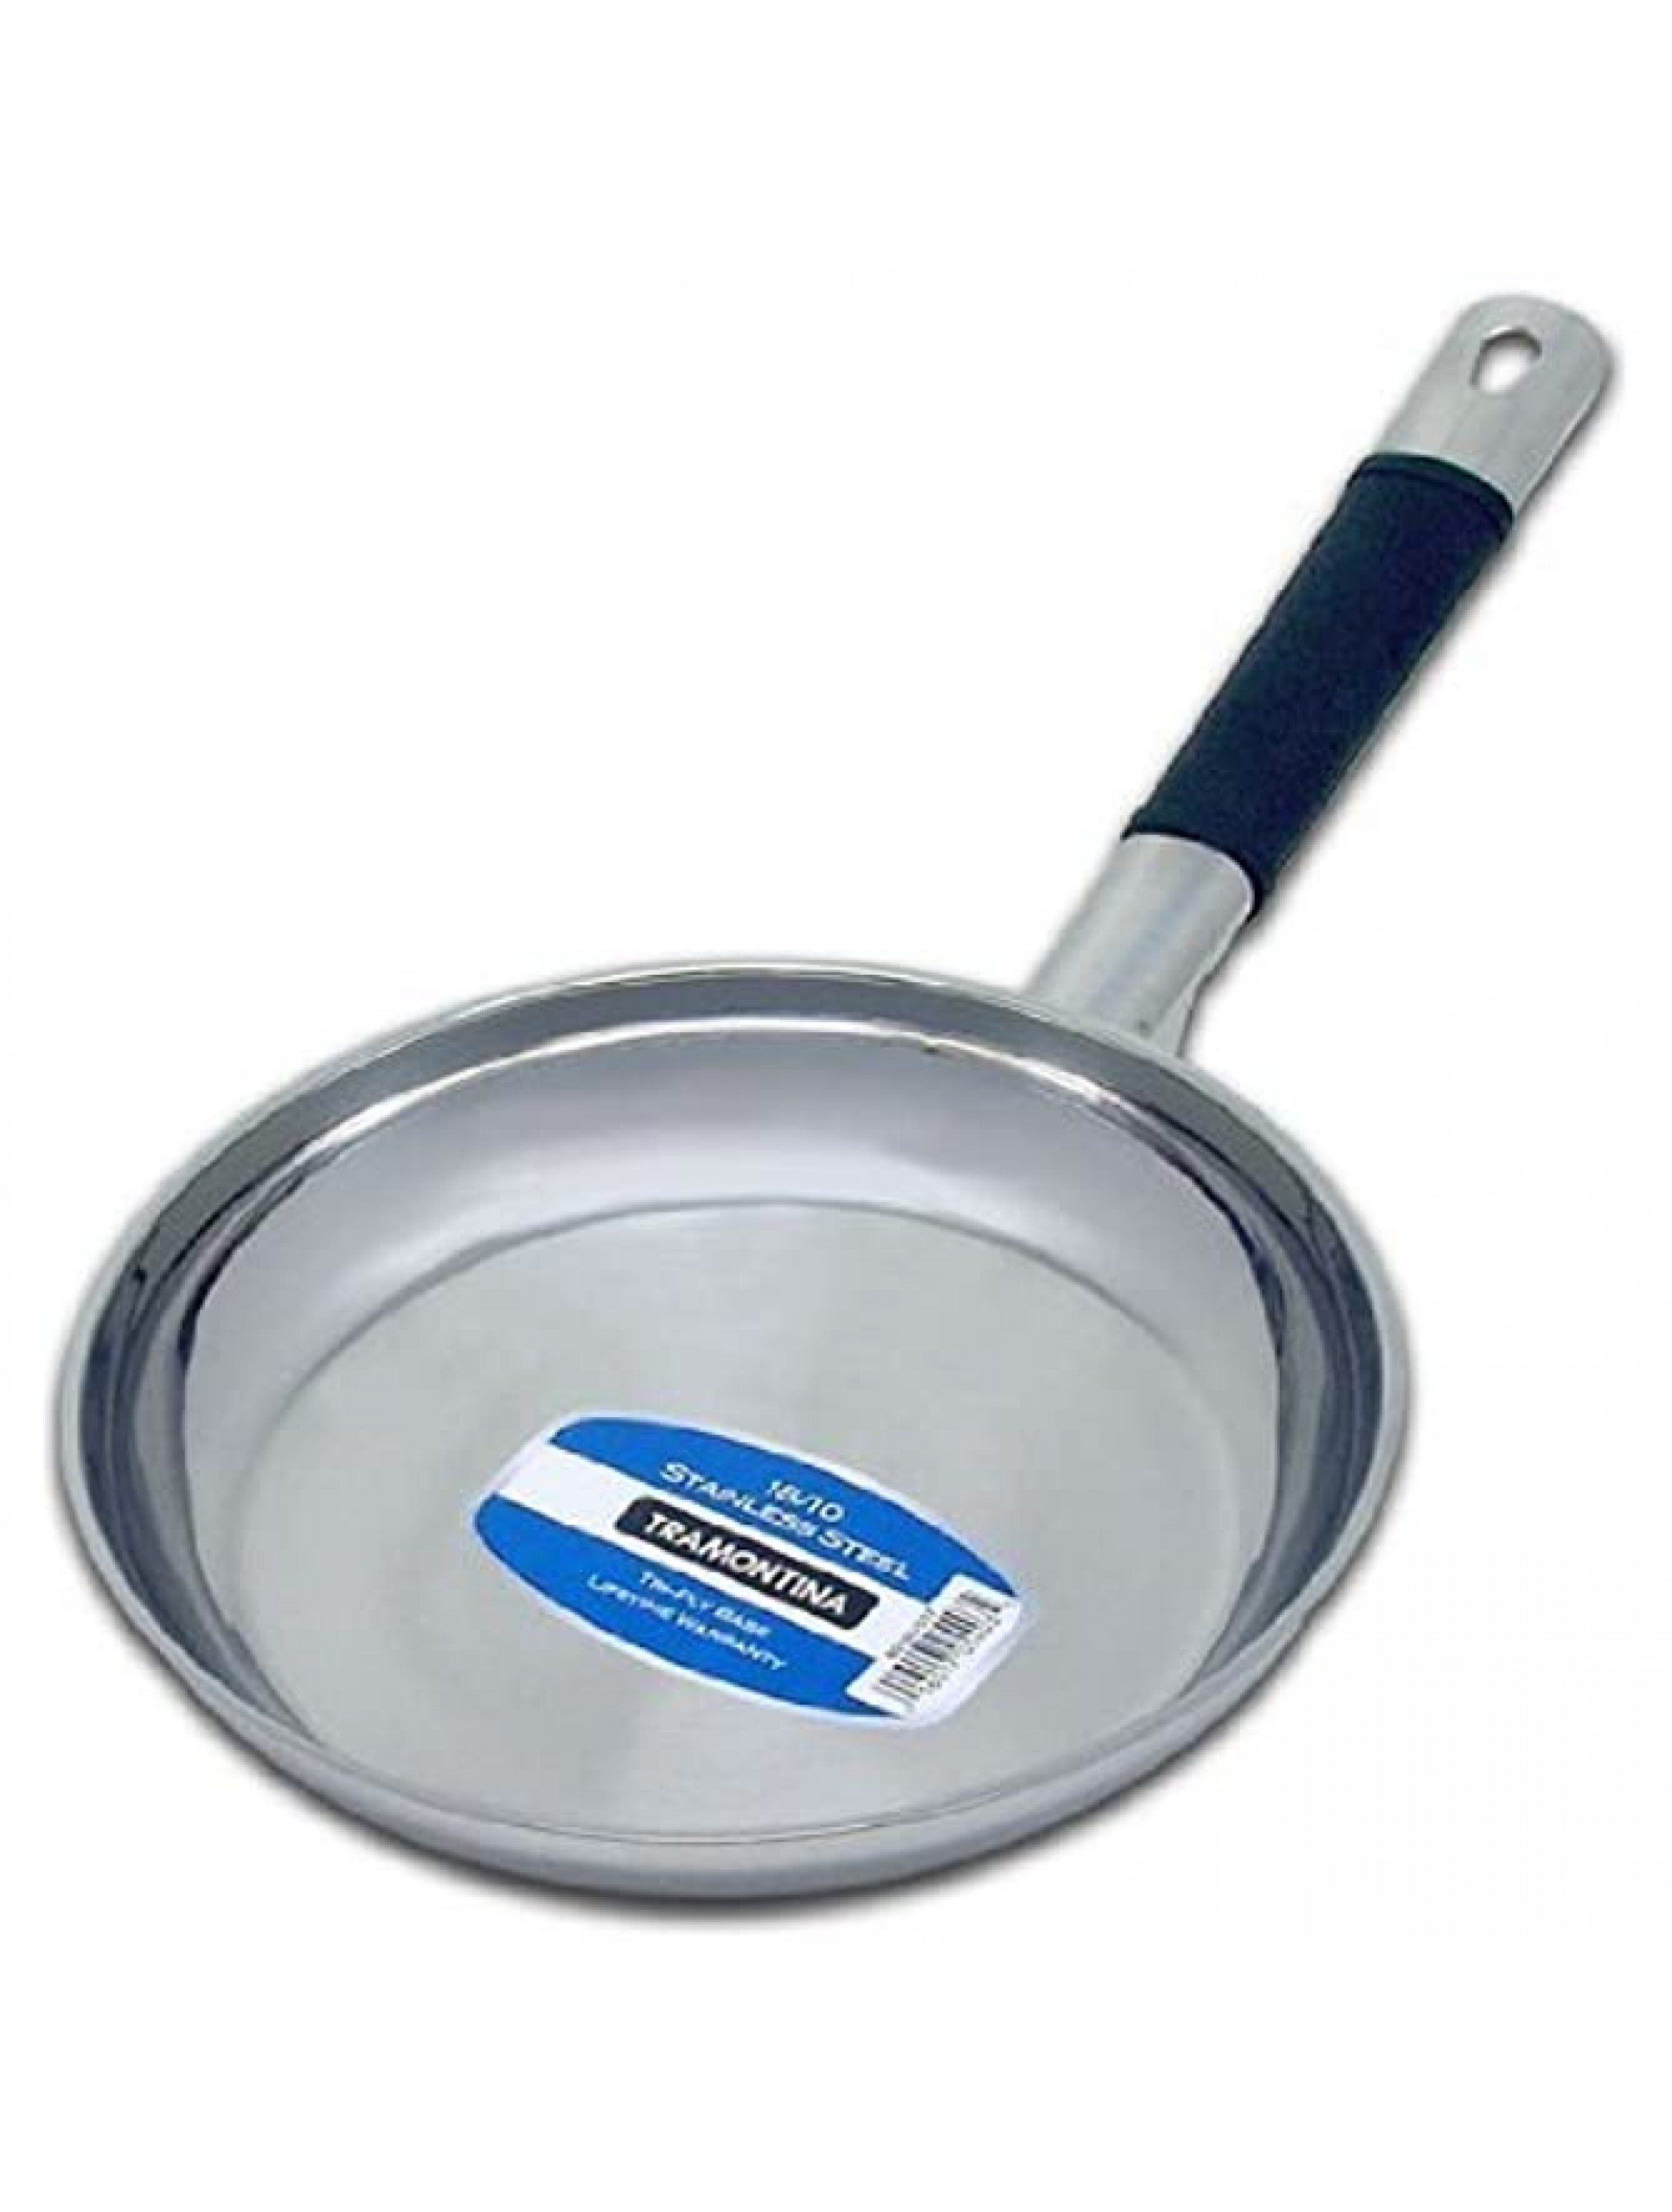 8 20cm 18 10 Tramontina Stainless Steel Saute Frying Sauce Skillet Fry Pan - B5UCGZQ1L